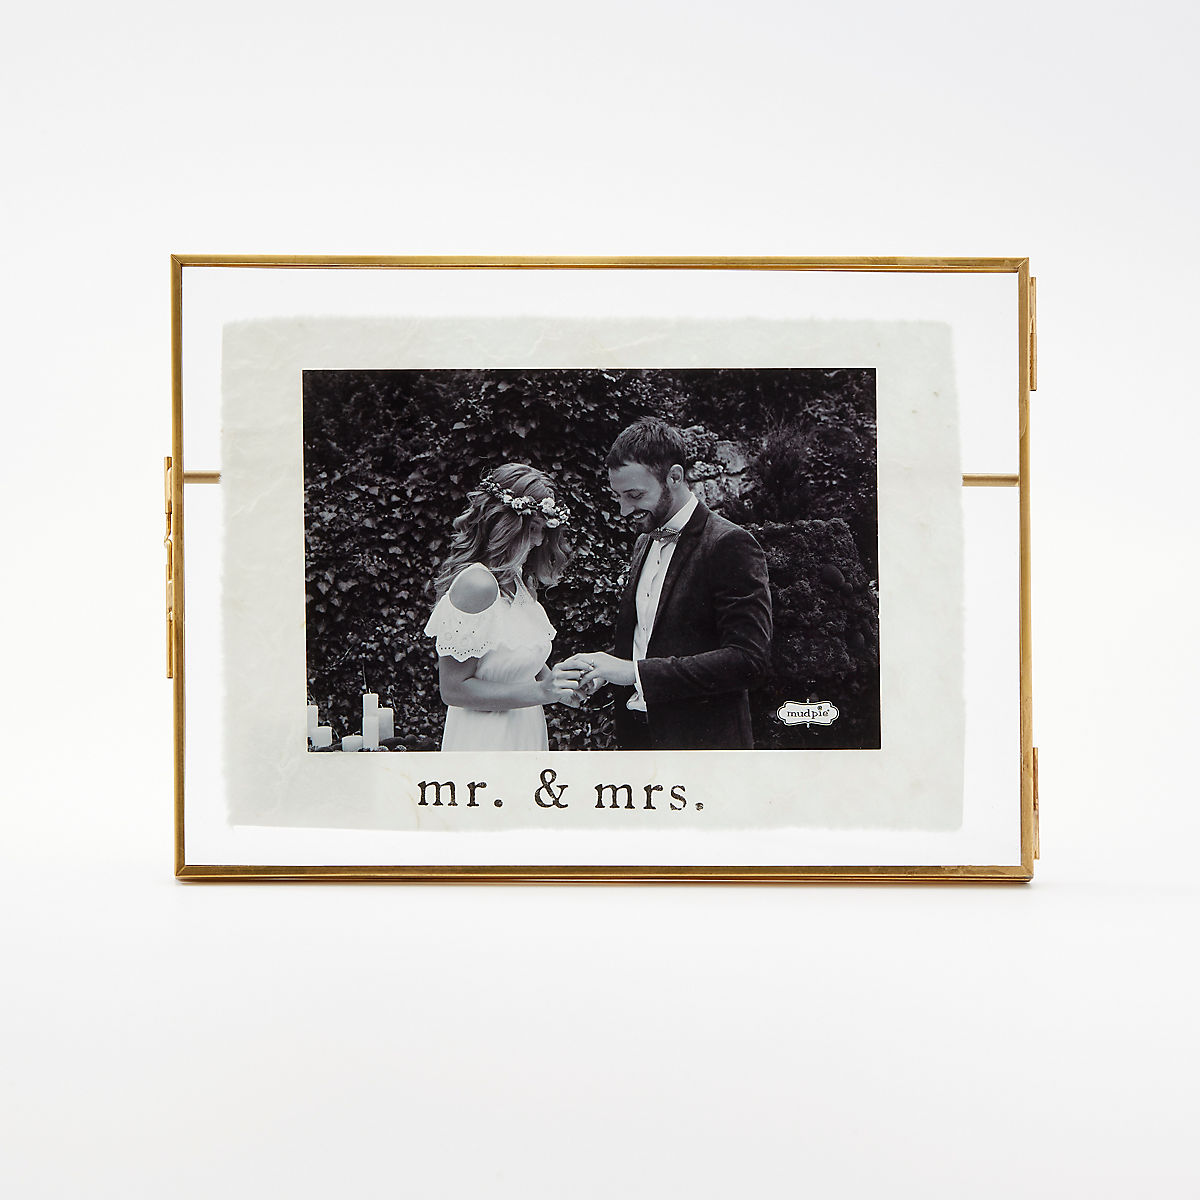 4 x 6 Off White Wedding Keepsake Picture Frame with Intertwined Rings and Flowers 